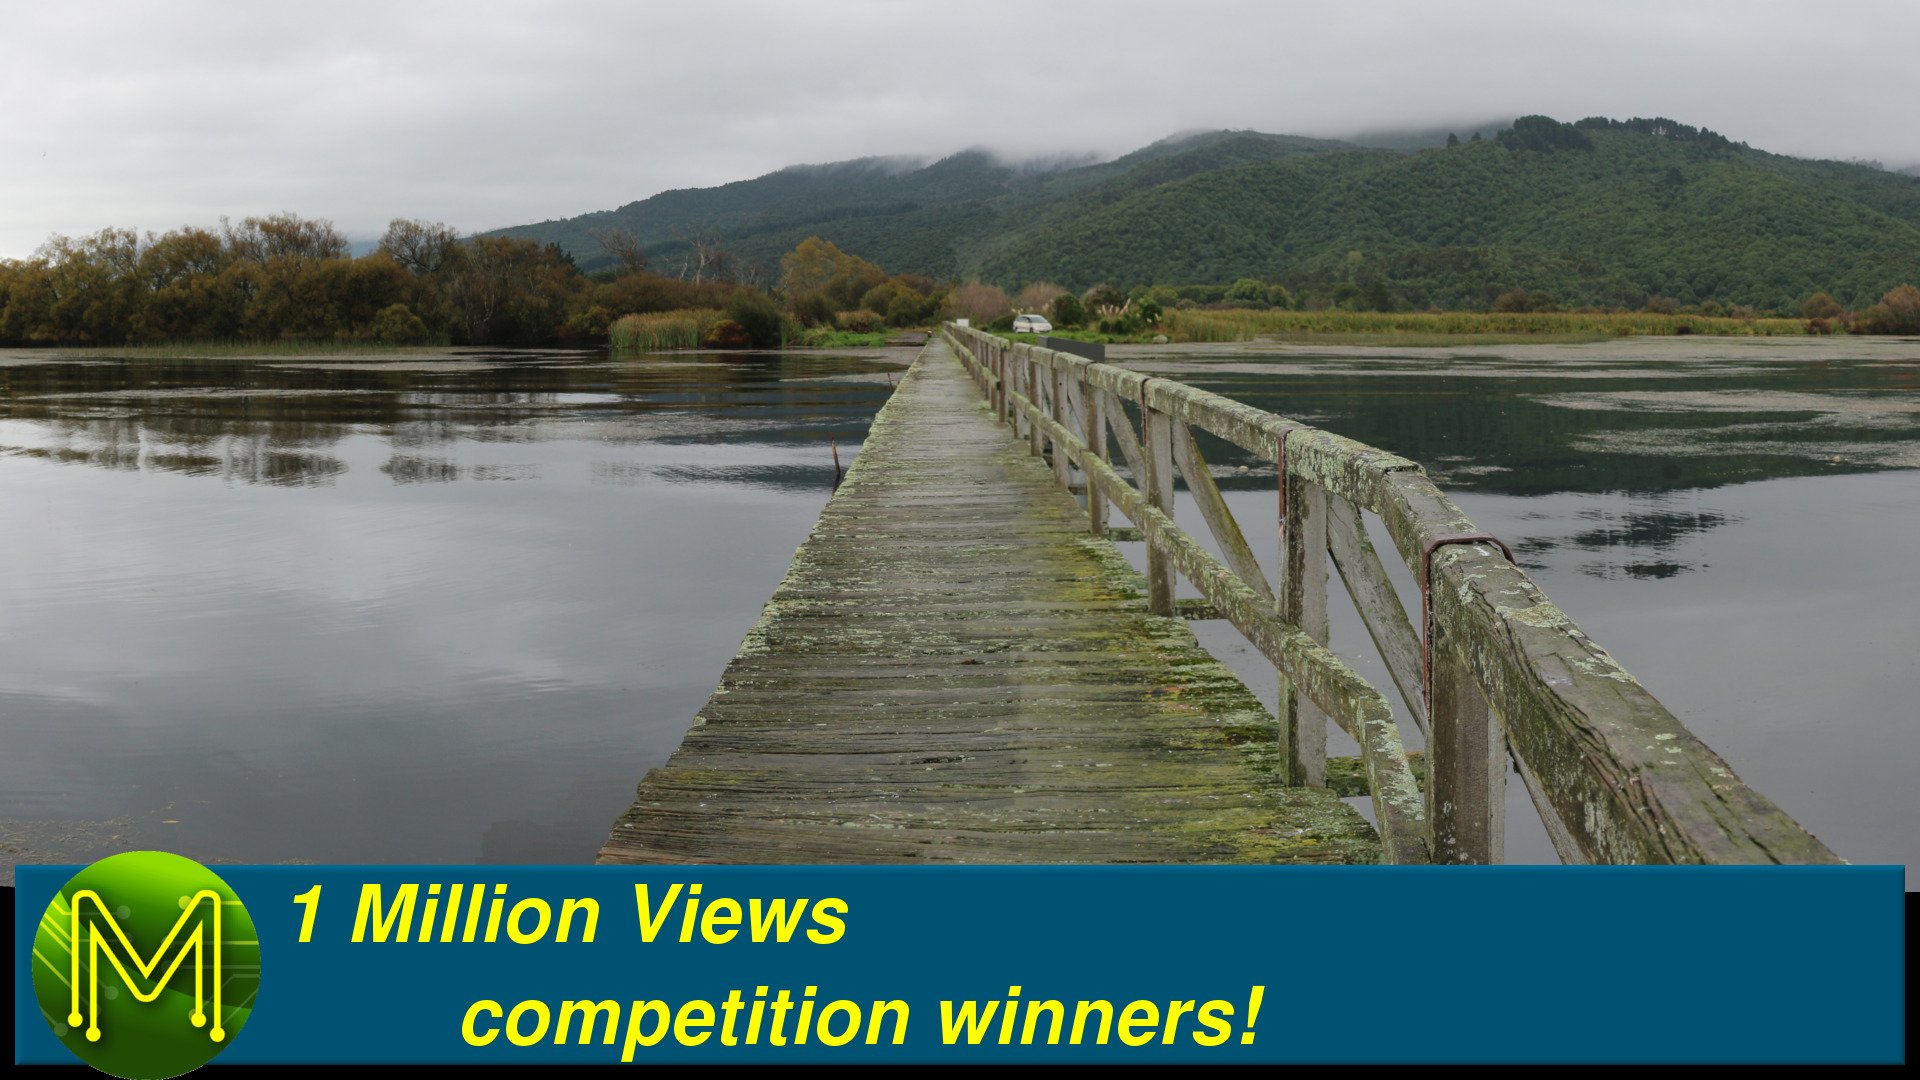 1 Million Views competition winners!